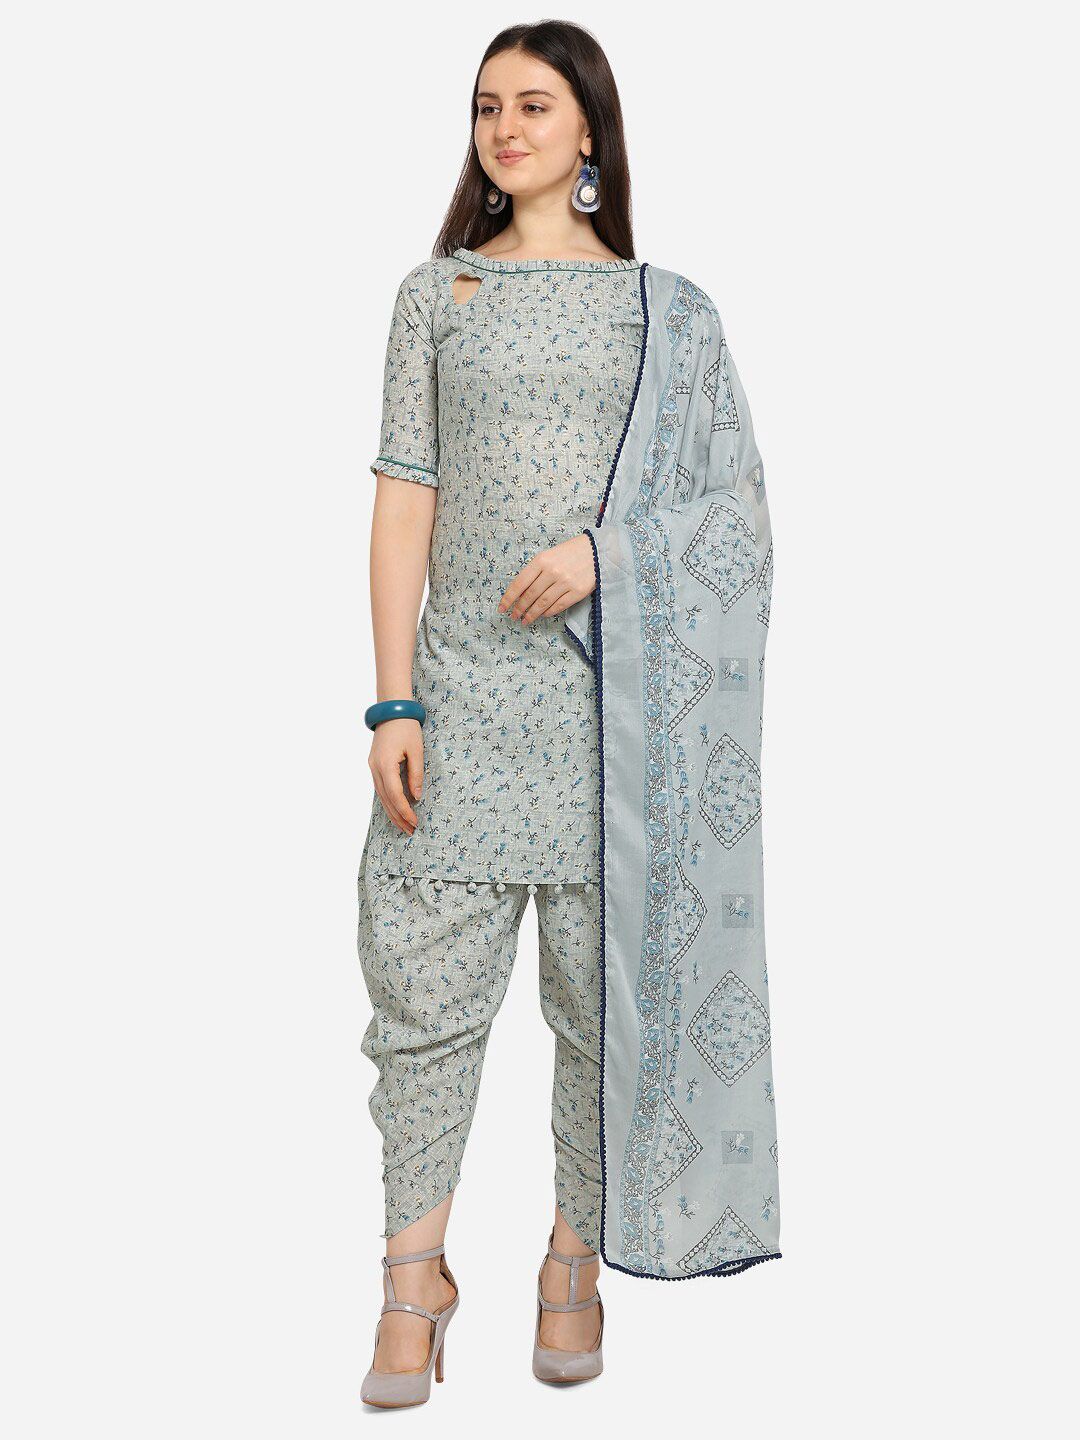 SHAVYA Blue & Grey Floral Printed Unstitched Dress Material Price in India